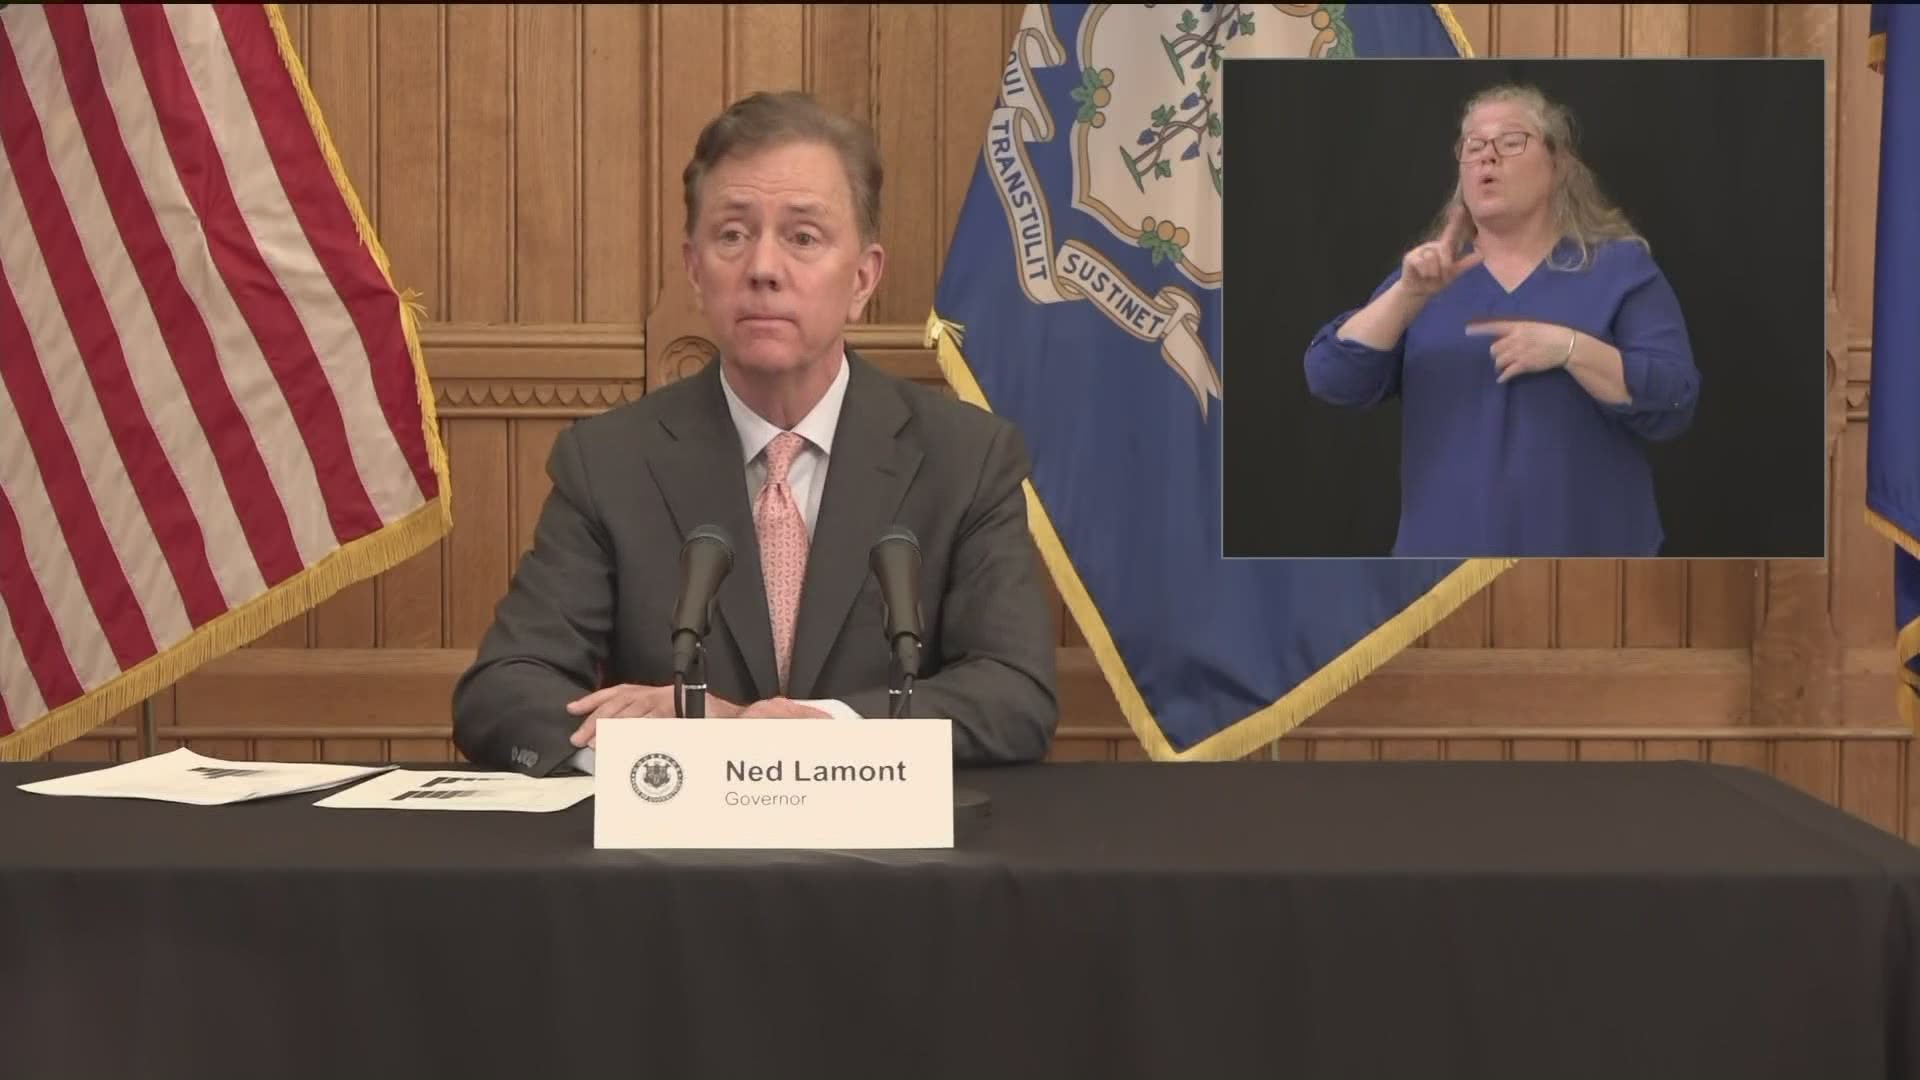 "I am running out of patience," said Governor Lamont